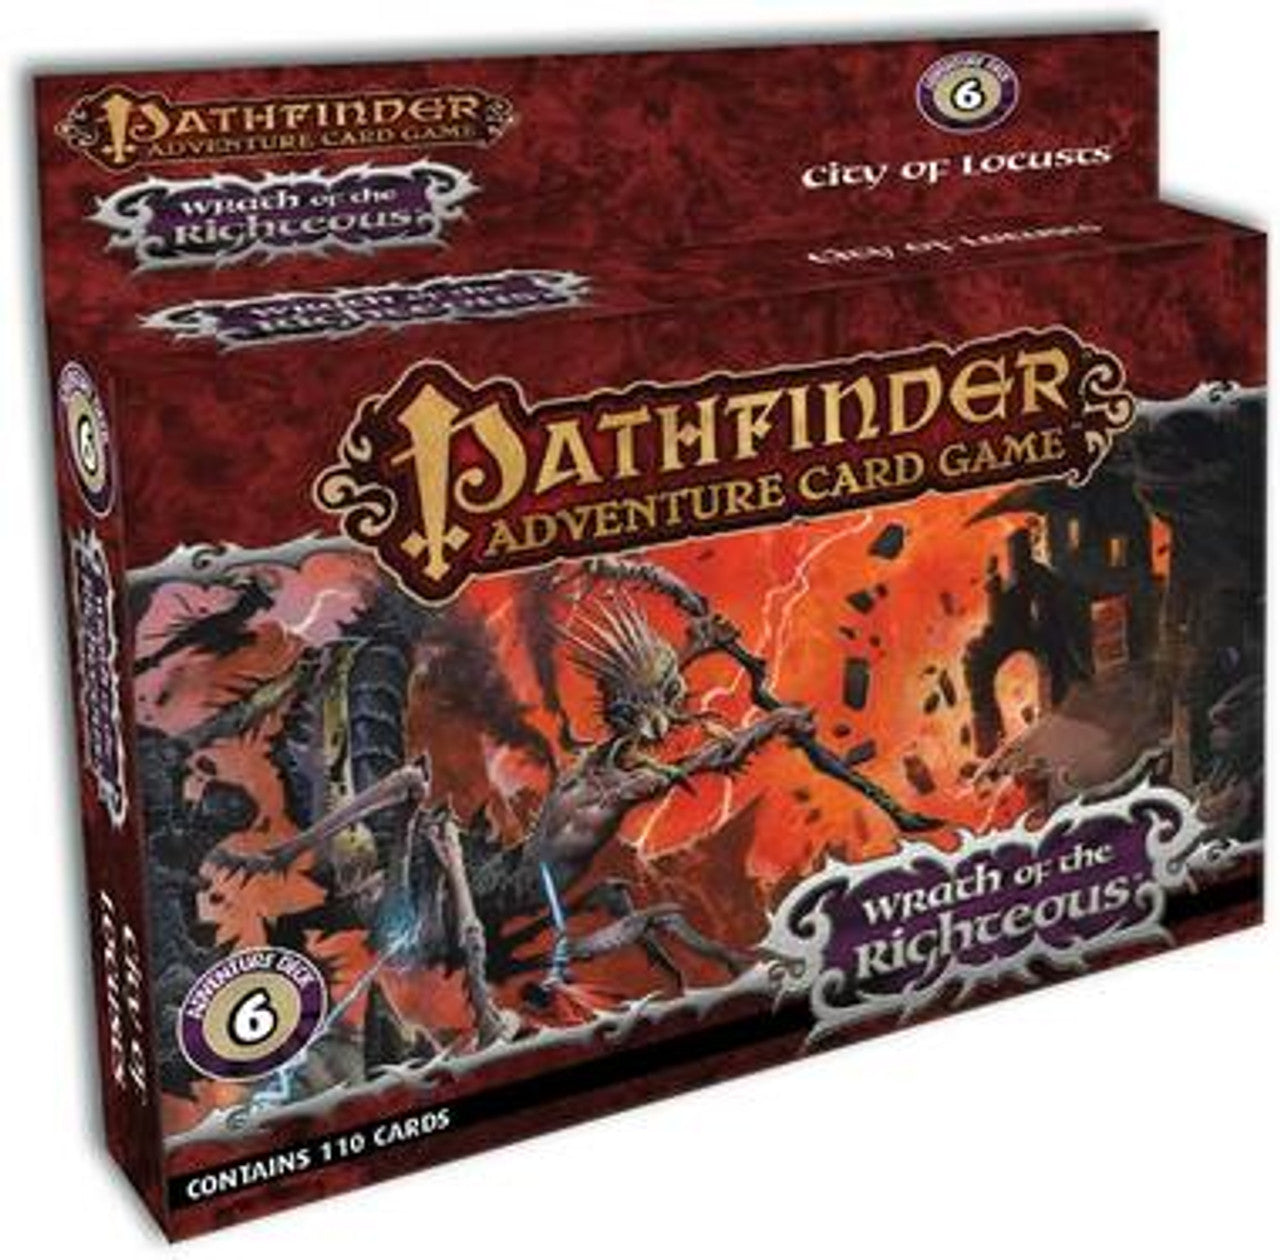 Pathfinder Adventure Card Game: City of Locusts Adventure Deck (Wrath of the Righteous 6 of 6) | Gamers Paradise